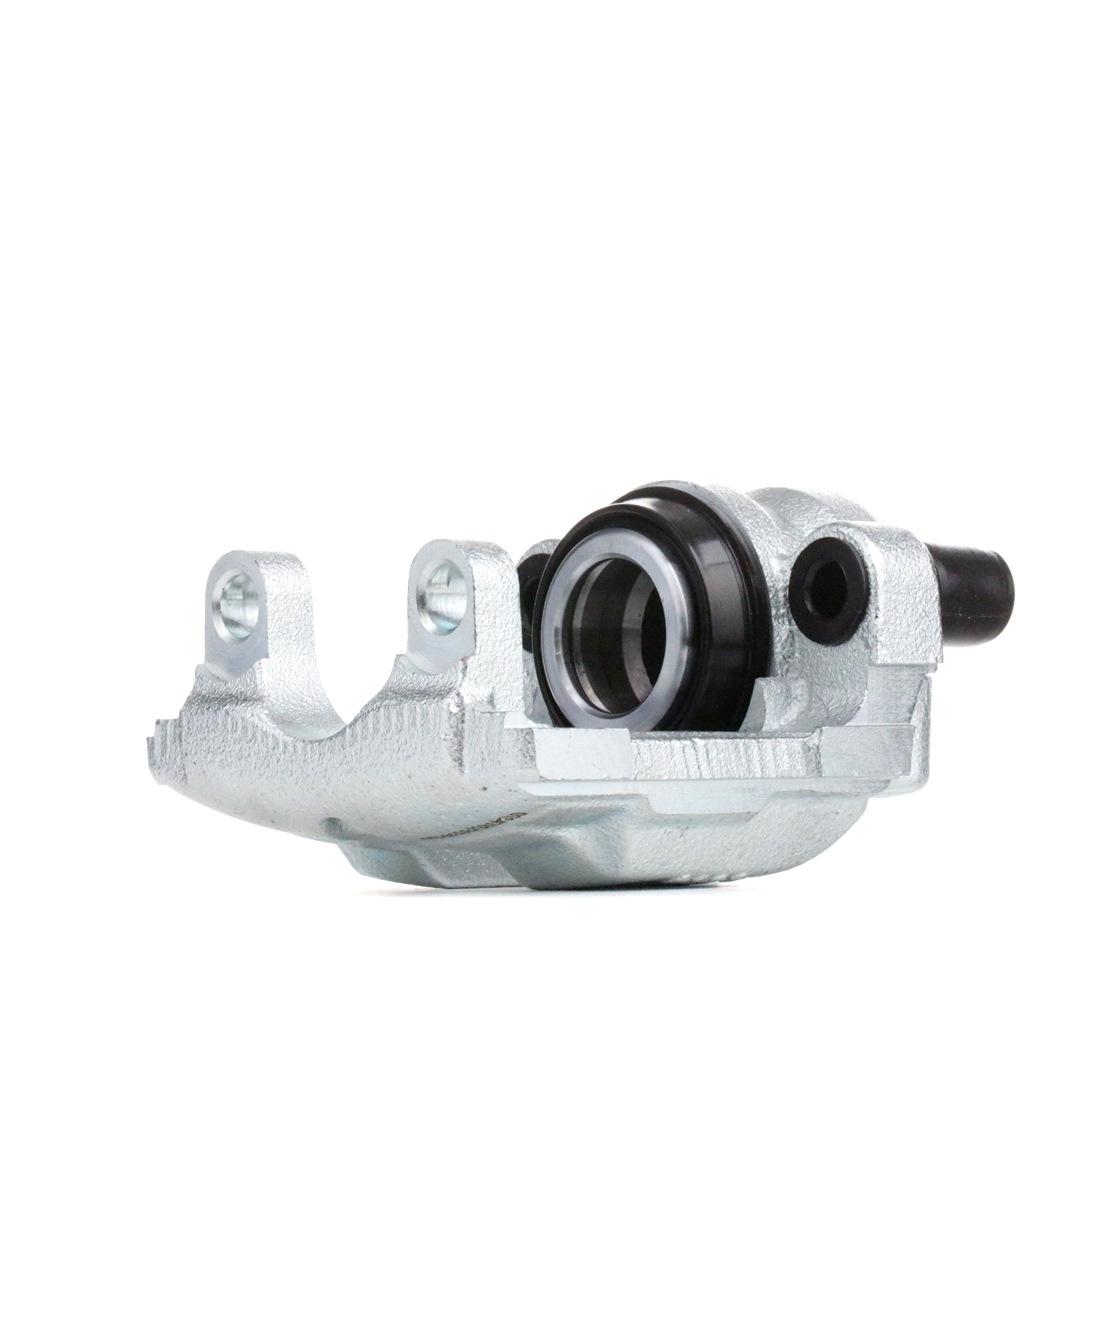 STARK SKBC-0460361 Brake caliper Grey Cast Iron, 82,0, 82mm, Rear Axle Left, without holder, with holding frame